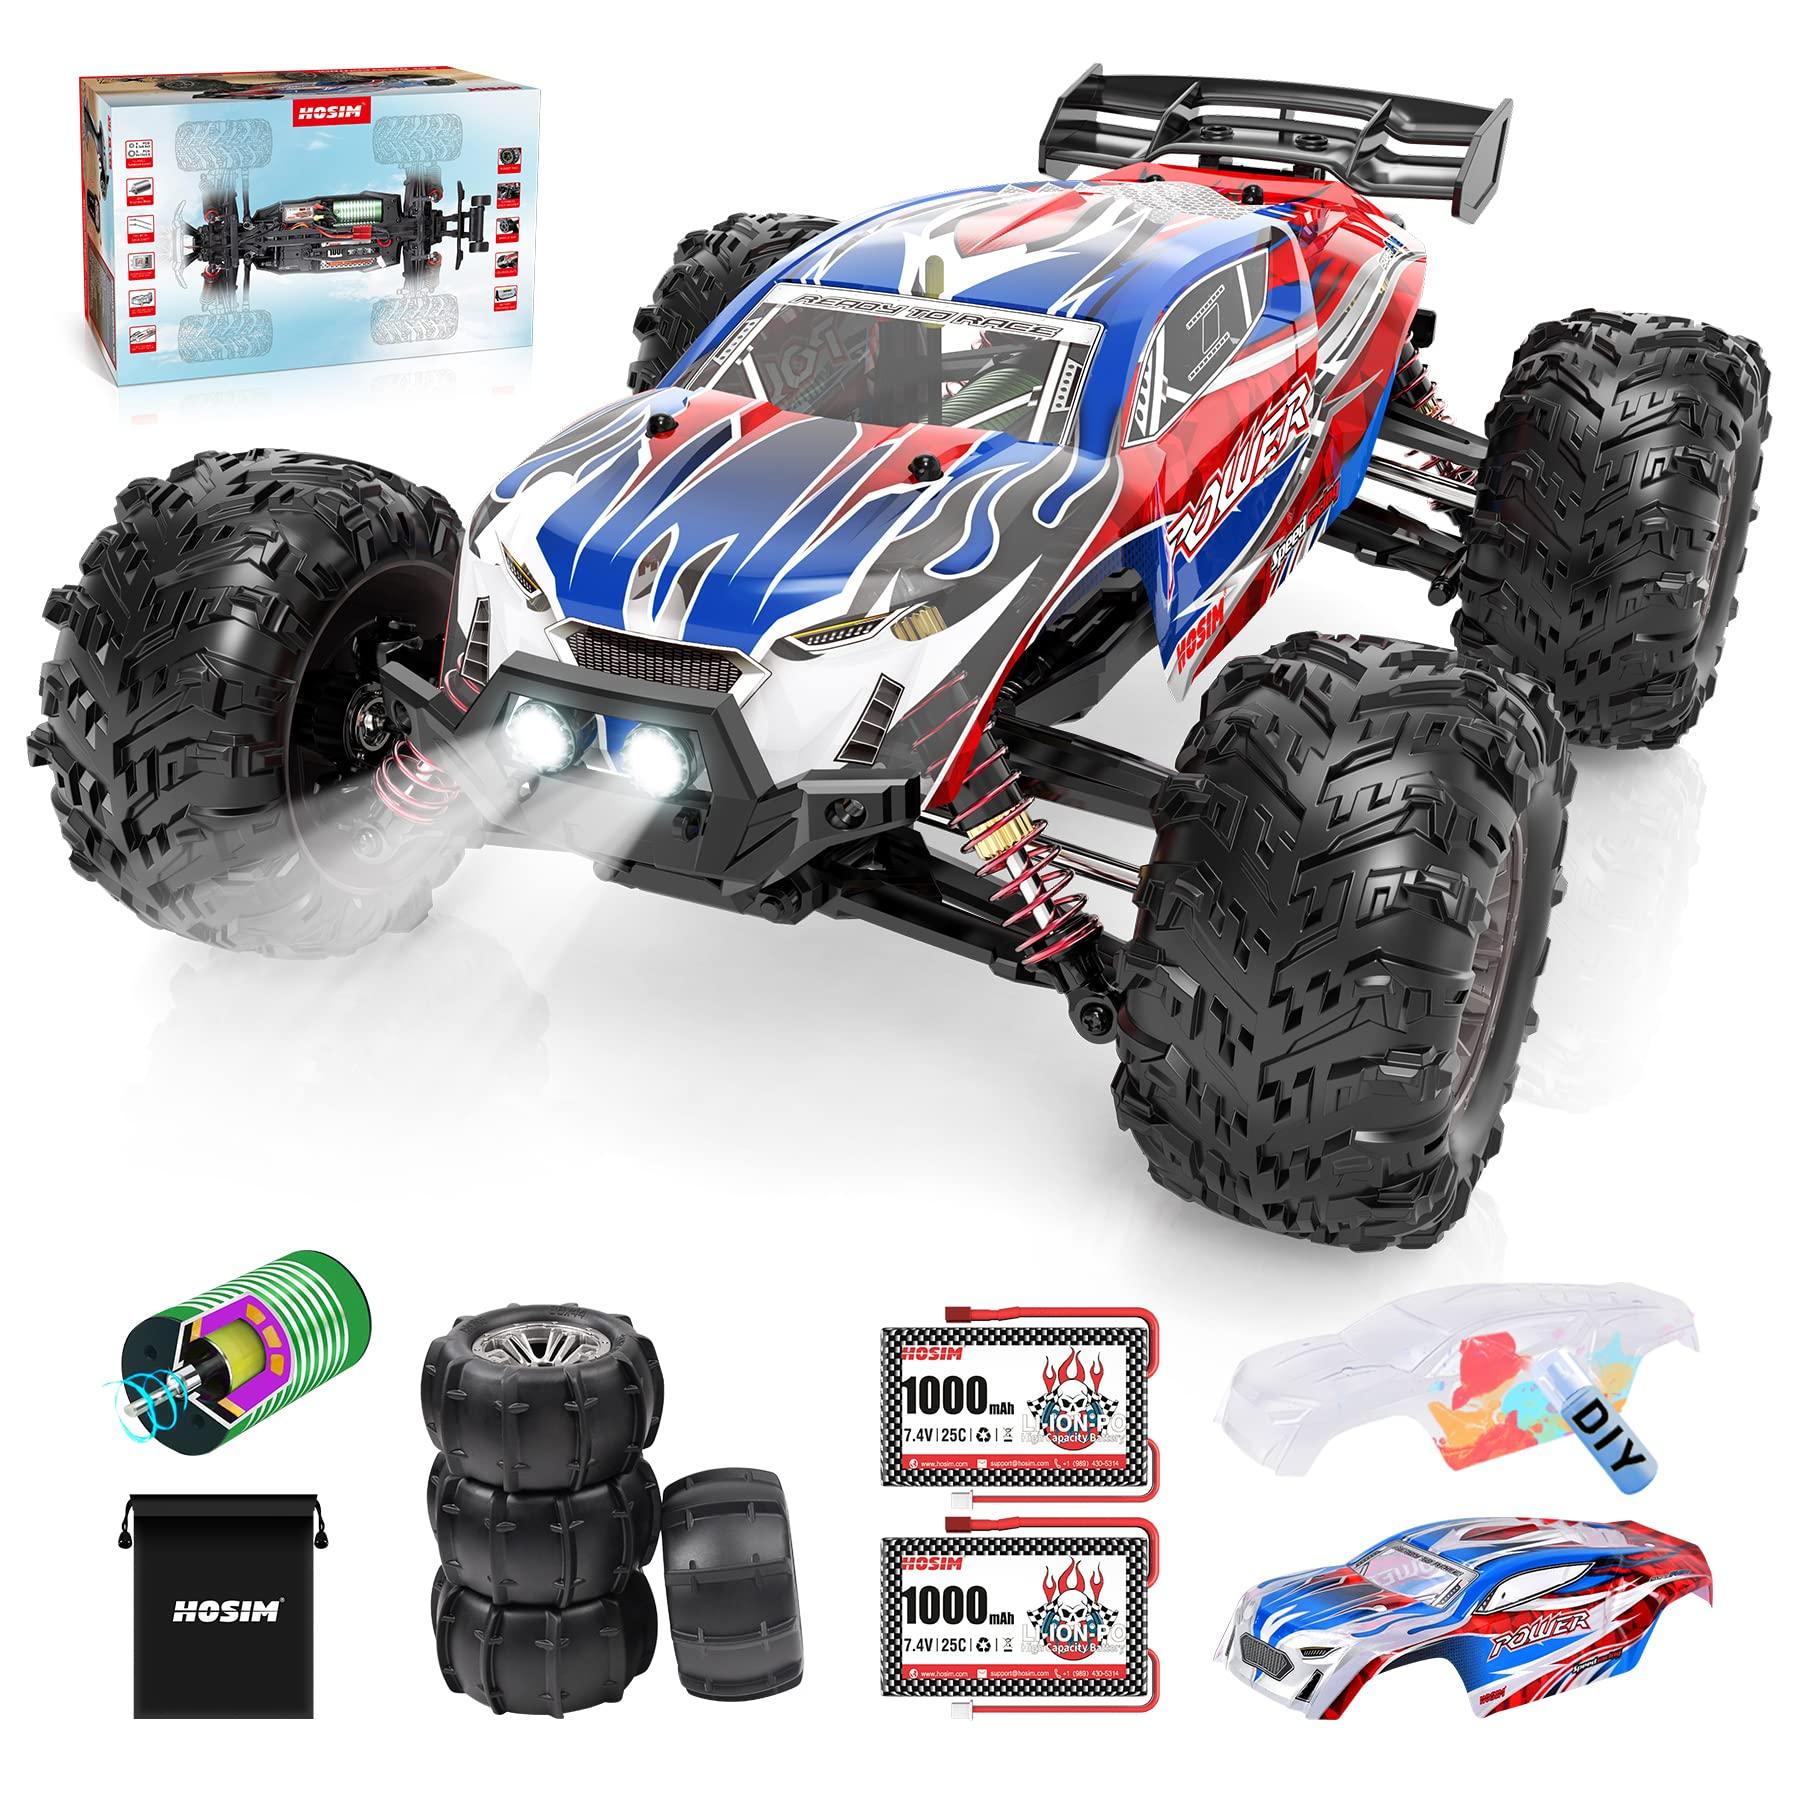 Best Brushless Rc Car: Top Brushless RC Cars: A Comprehensive Overview and Comparison.